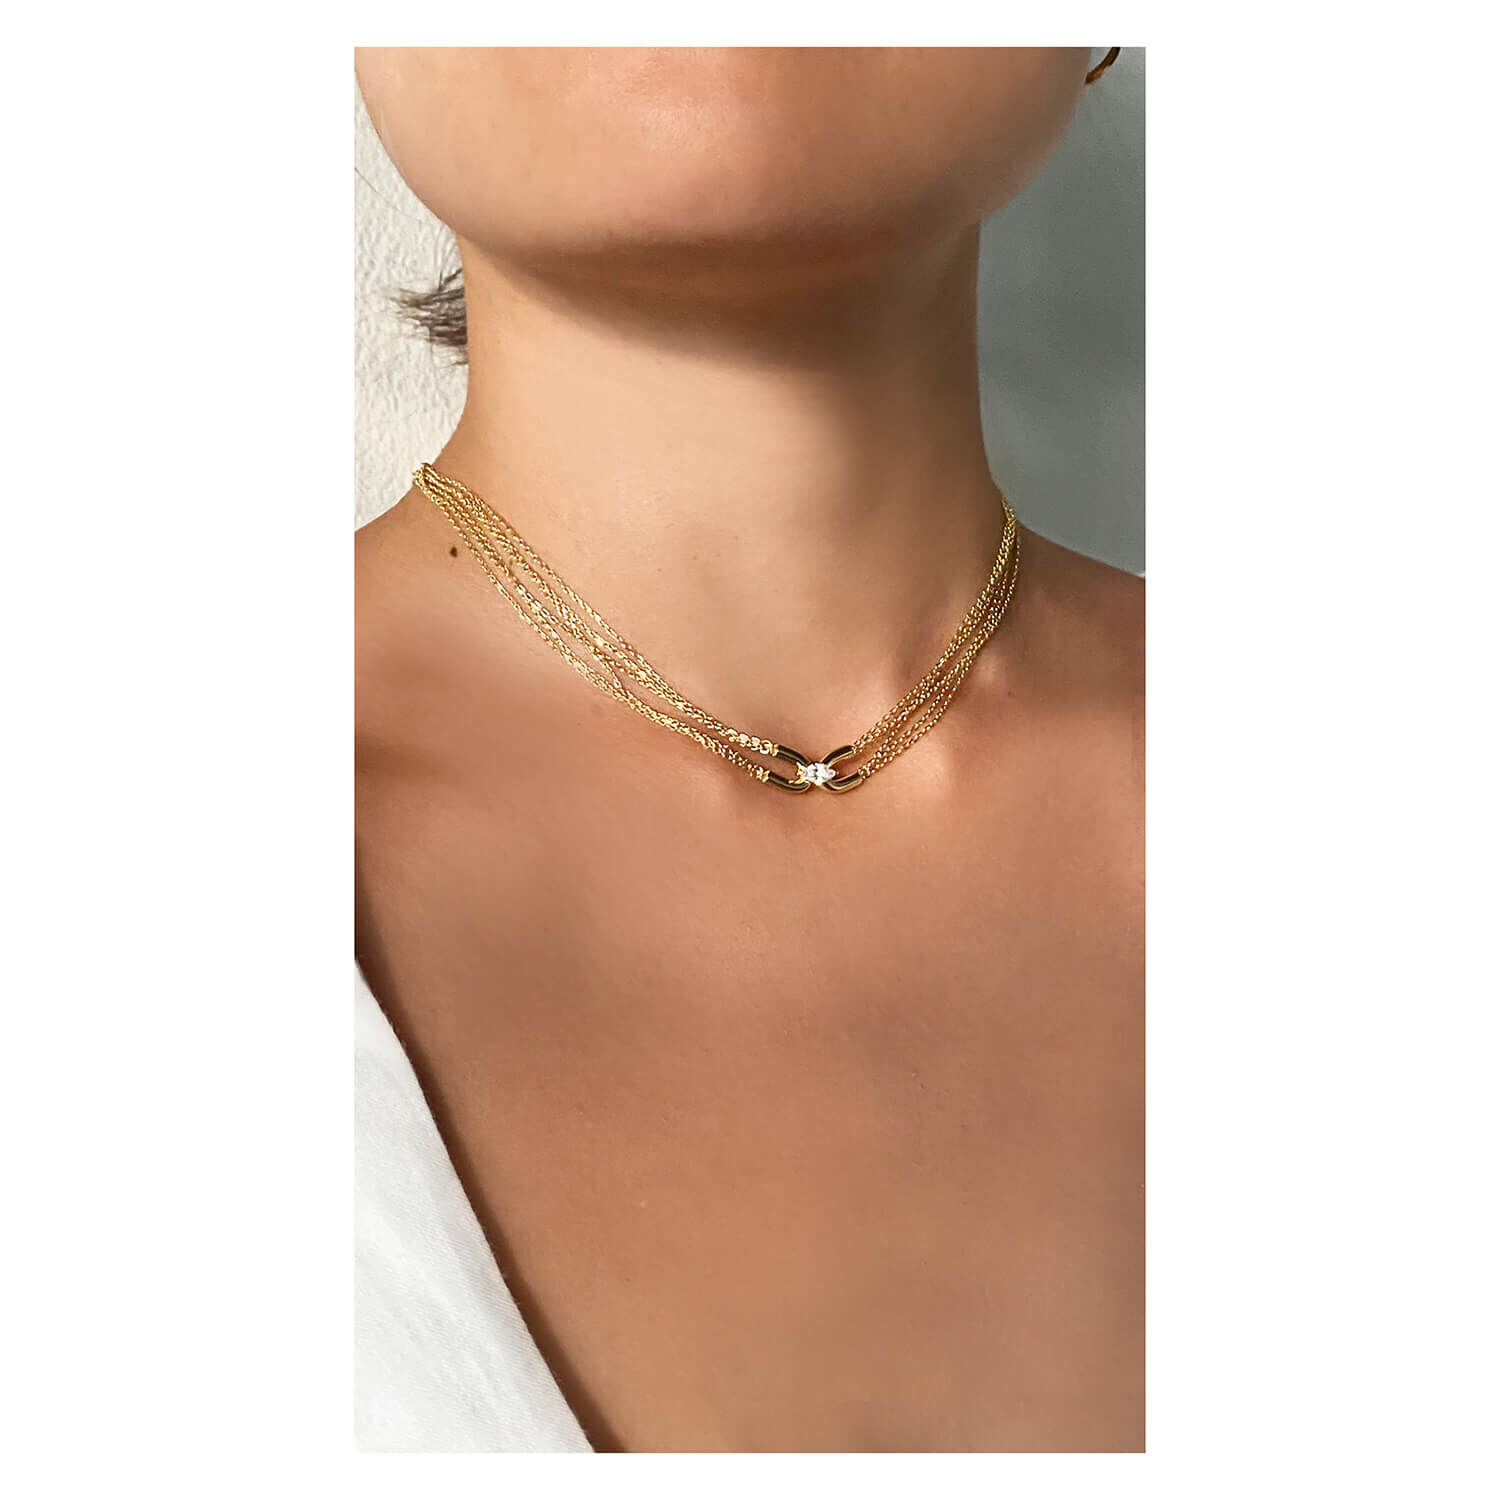 Engraved Heart Infinity Necklace in Gold Vermeil - MYKA